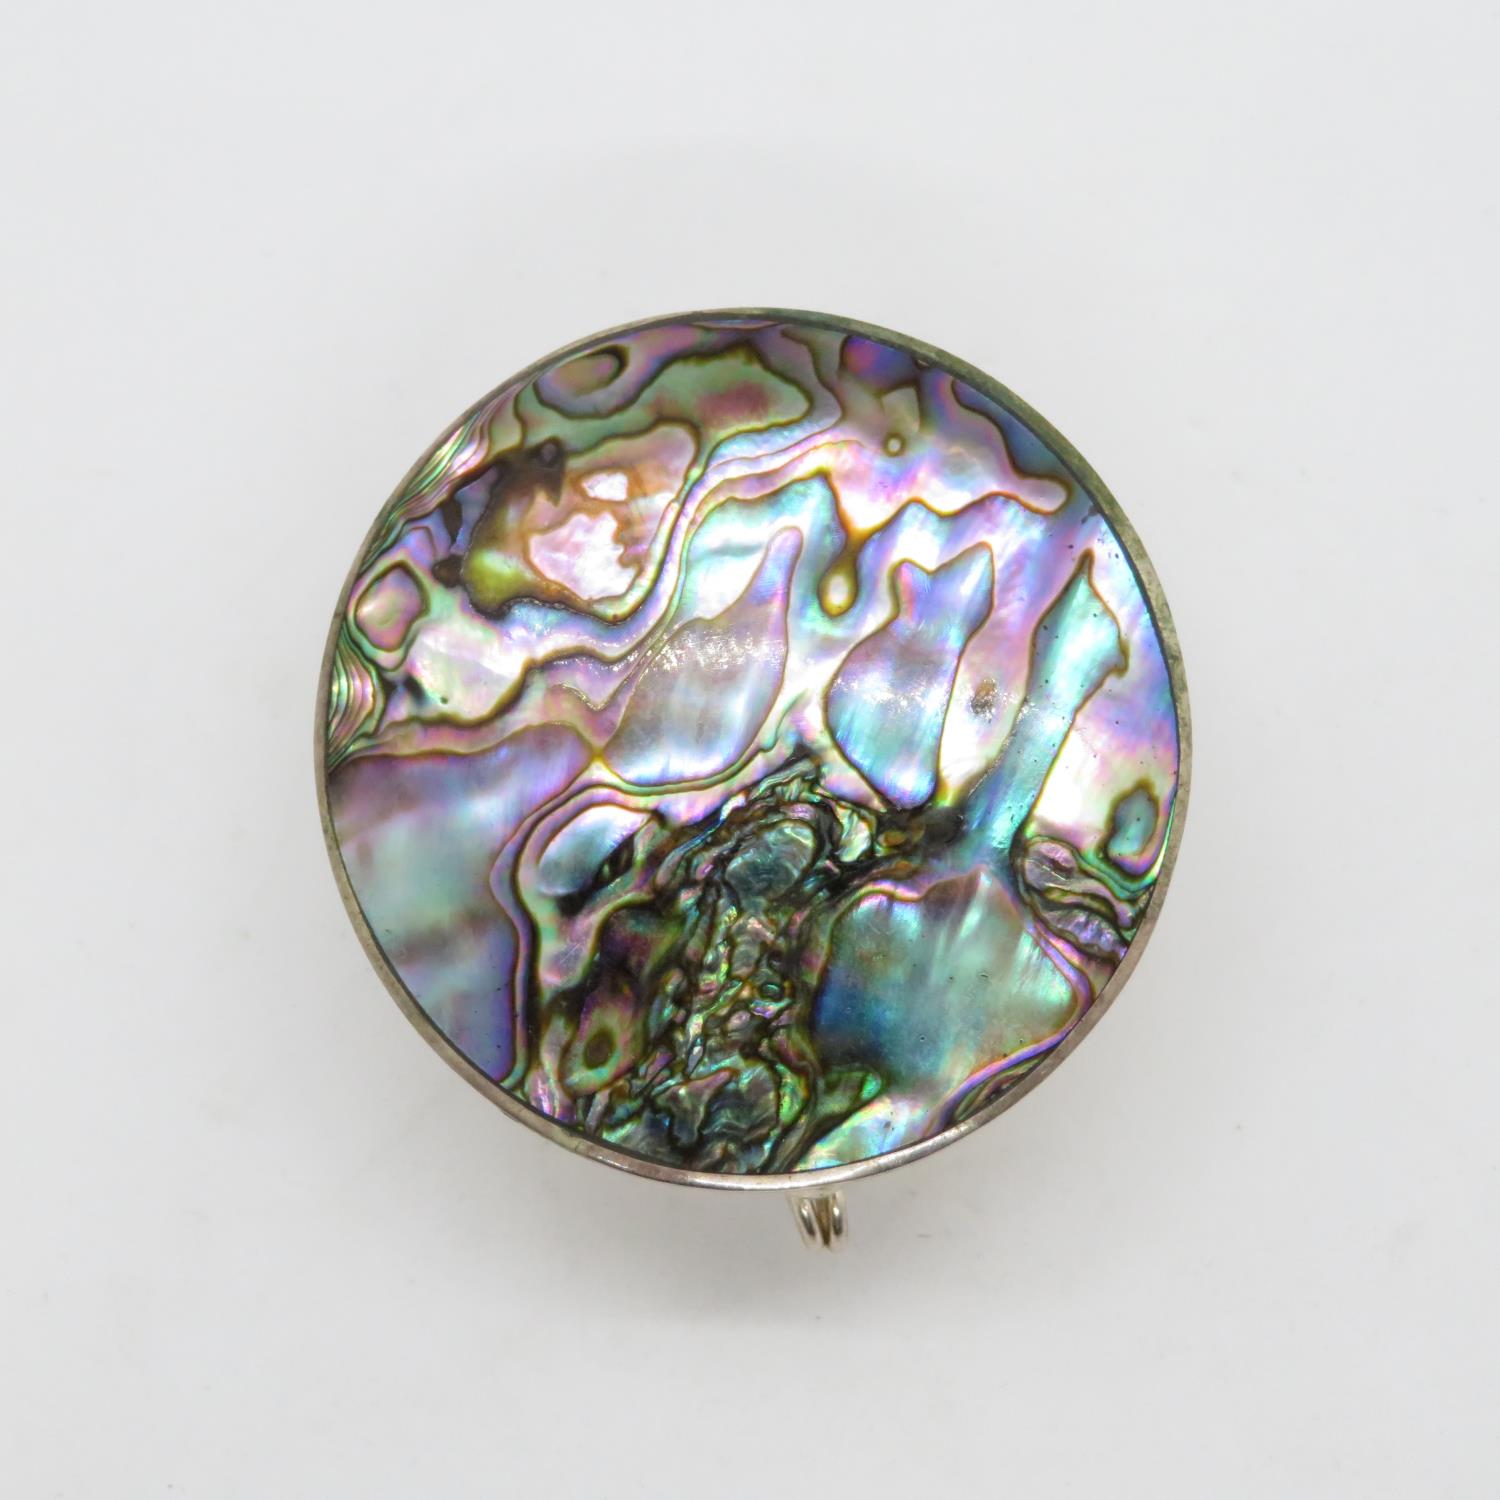 Silver and abalone shell trinket box - Image 2 of 3